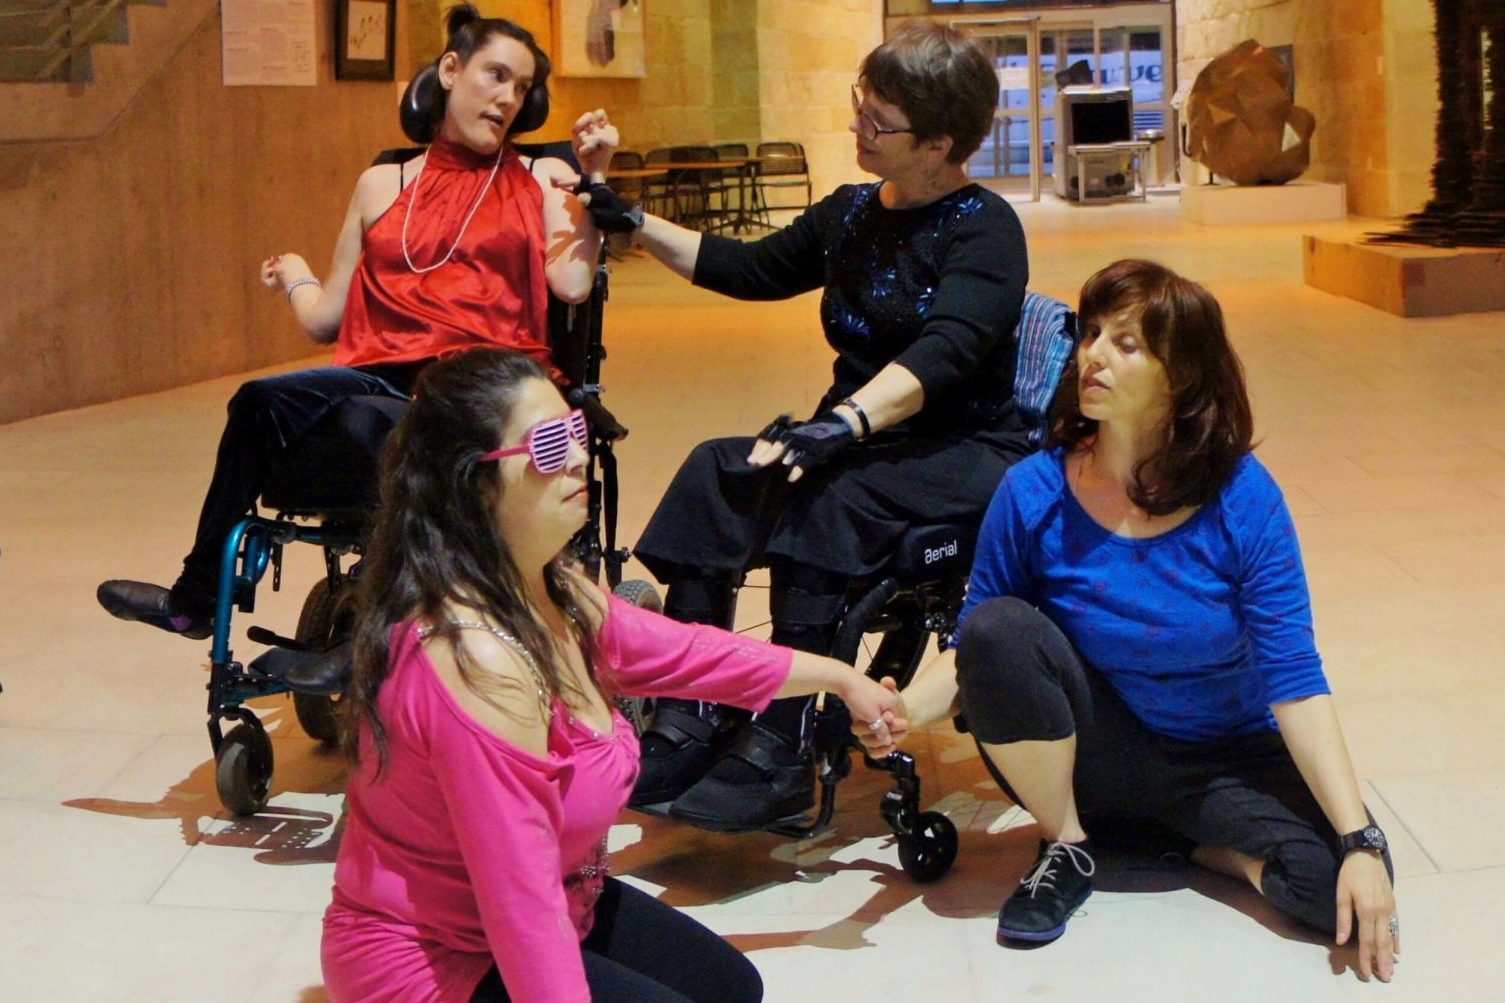 A group of 6 dancers with and without disabilities performing in an office hallway.